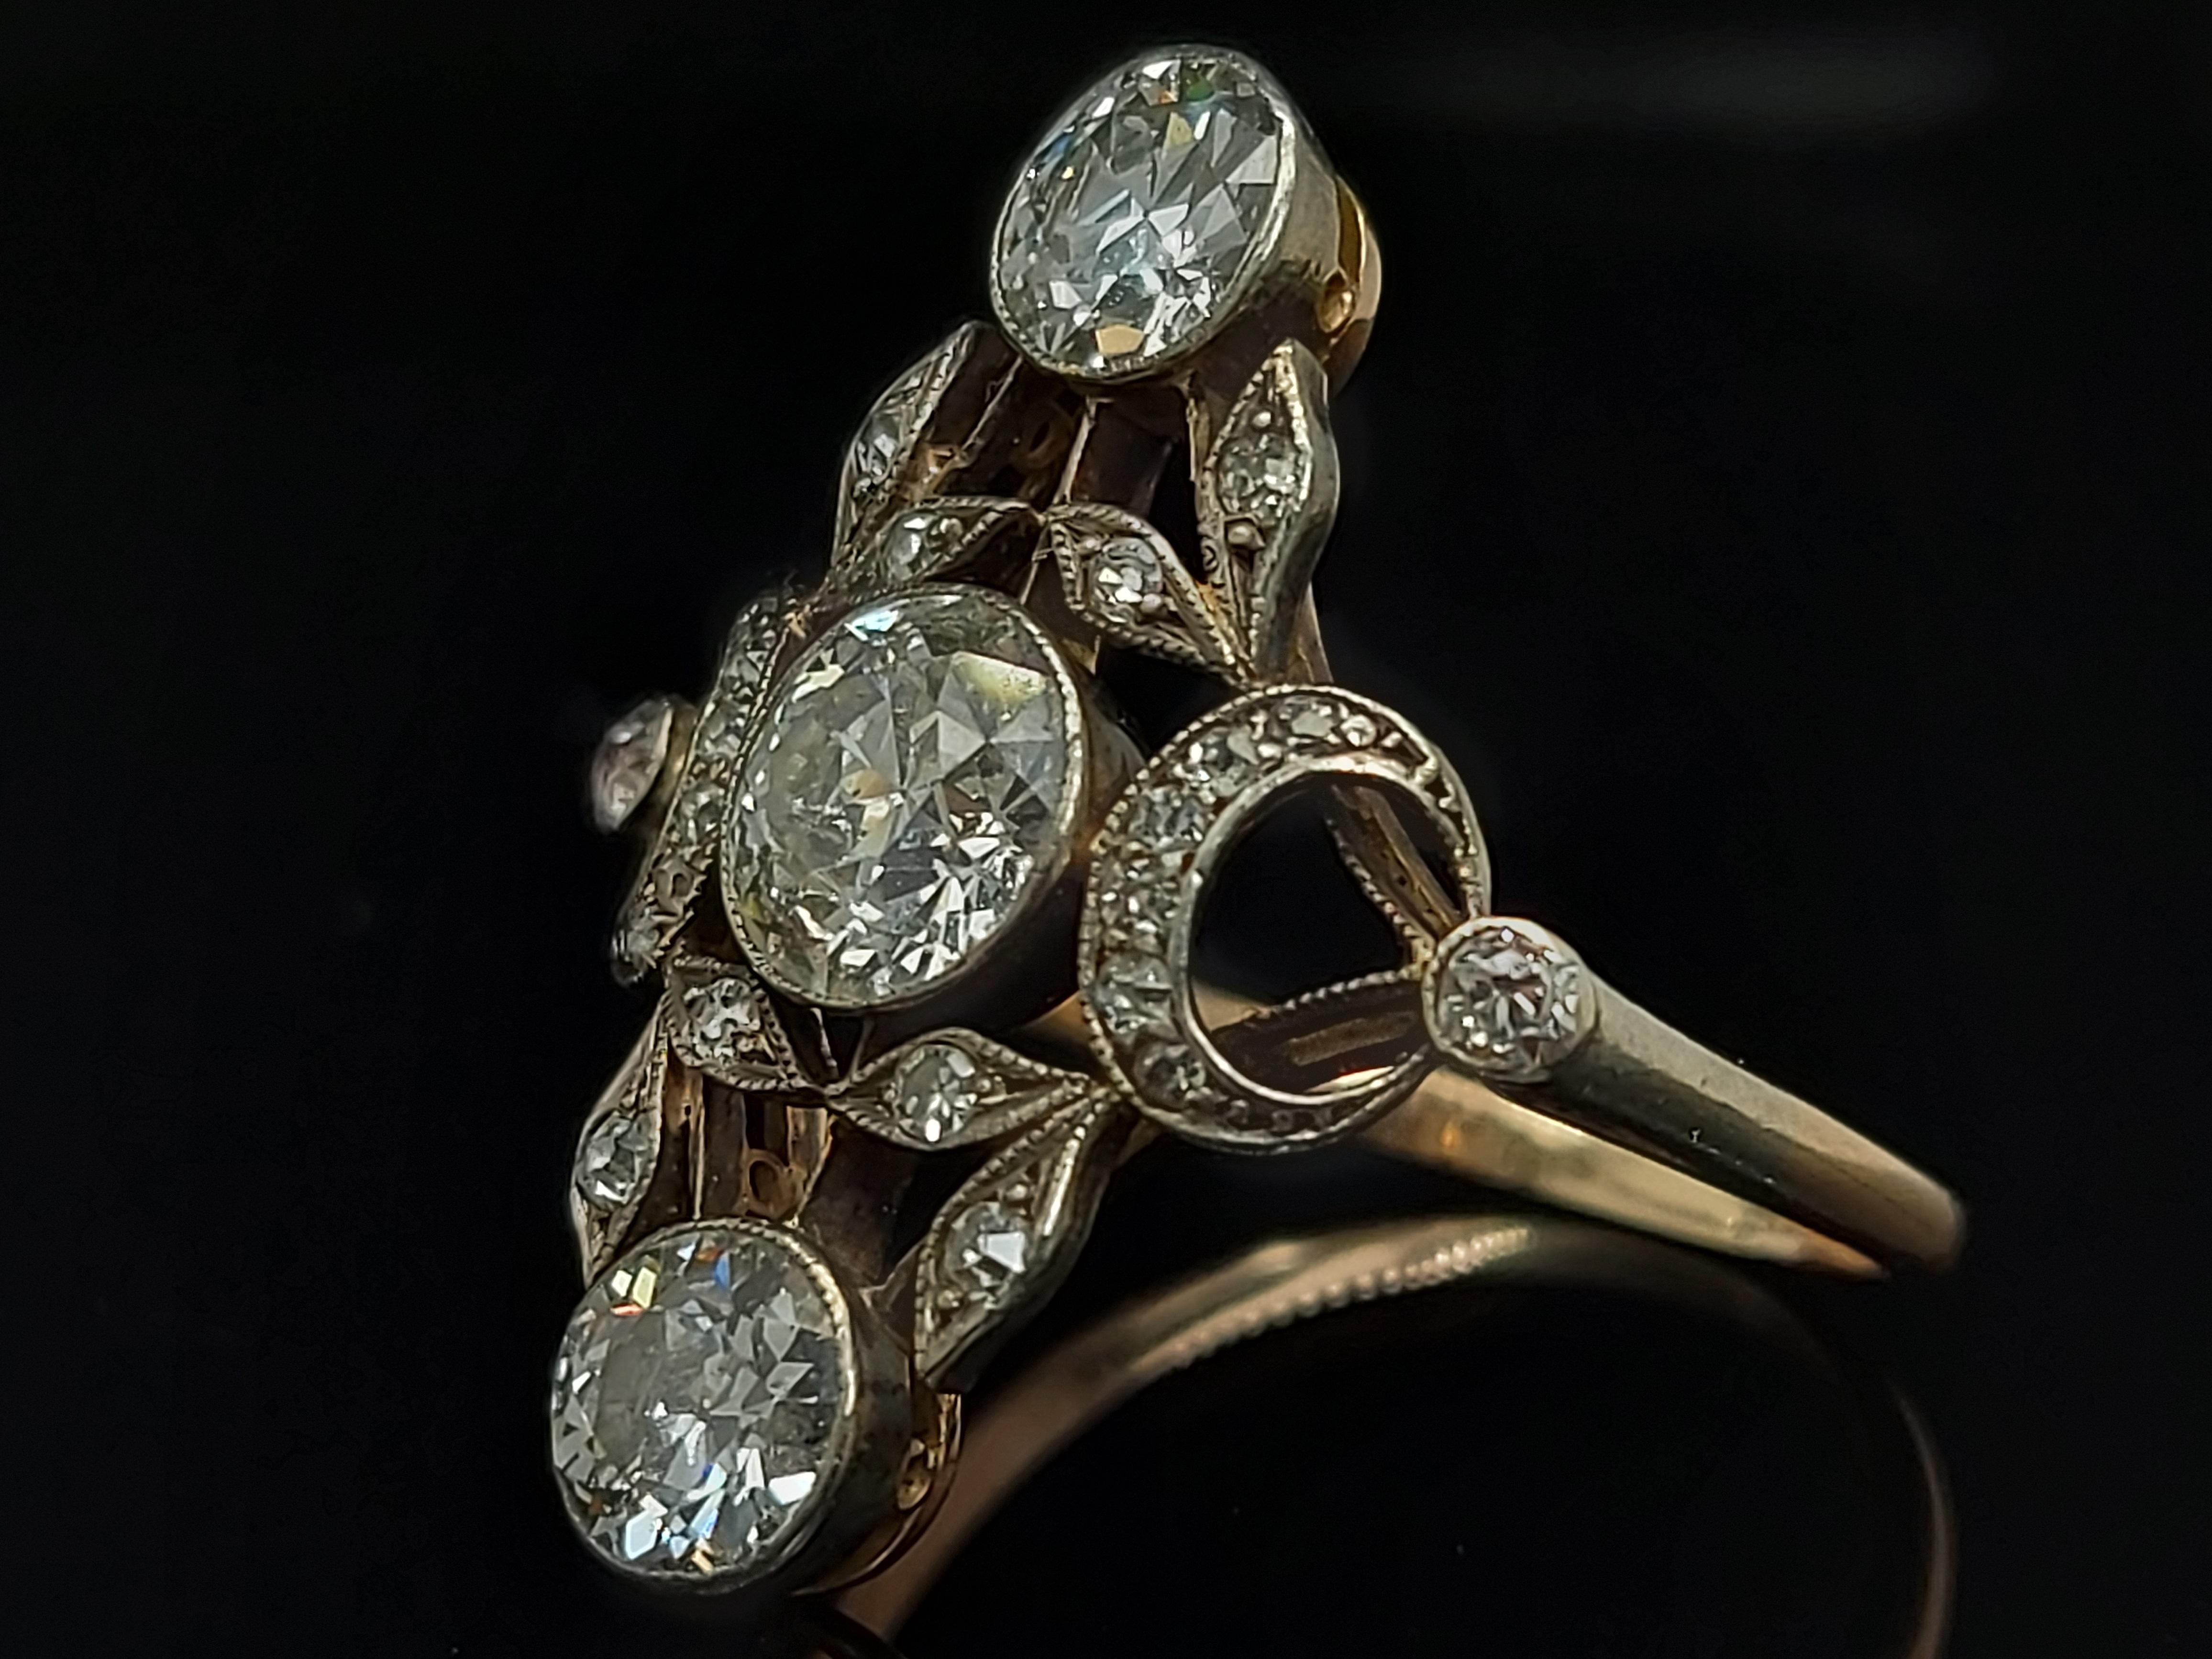 Stunning 18 Karat Gold and Silver Ring with Diamonds from the 1900s, Trilogy For Sale 1